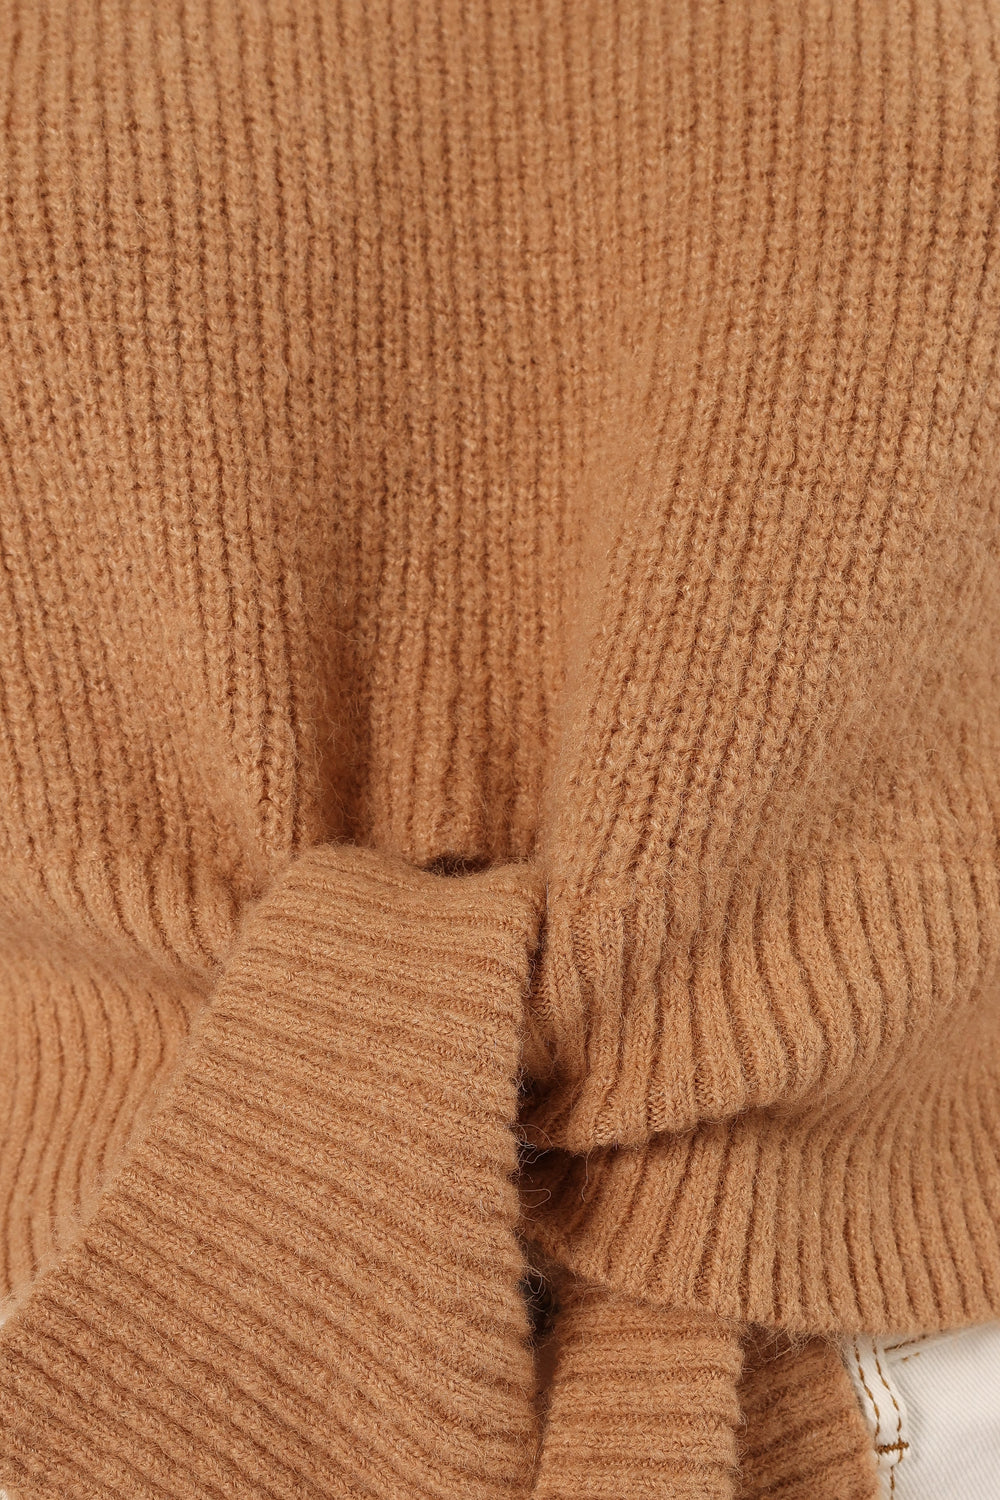 KNITWEAR @Captivate Knit Sweater - Mocha (Hold for Cool Beginnings)